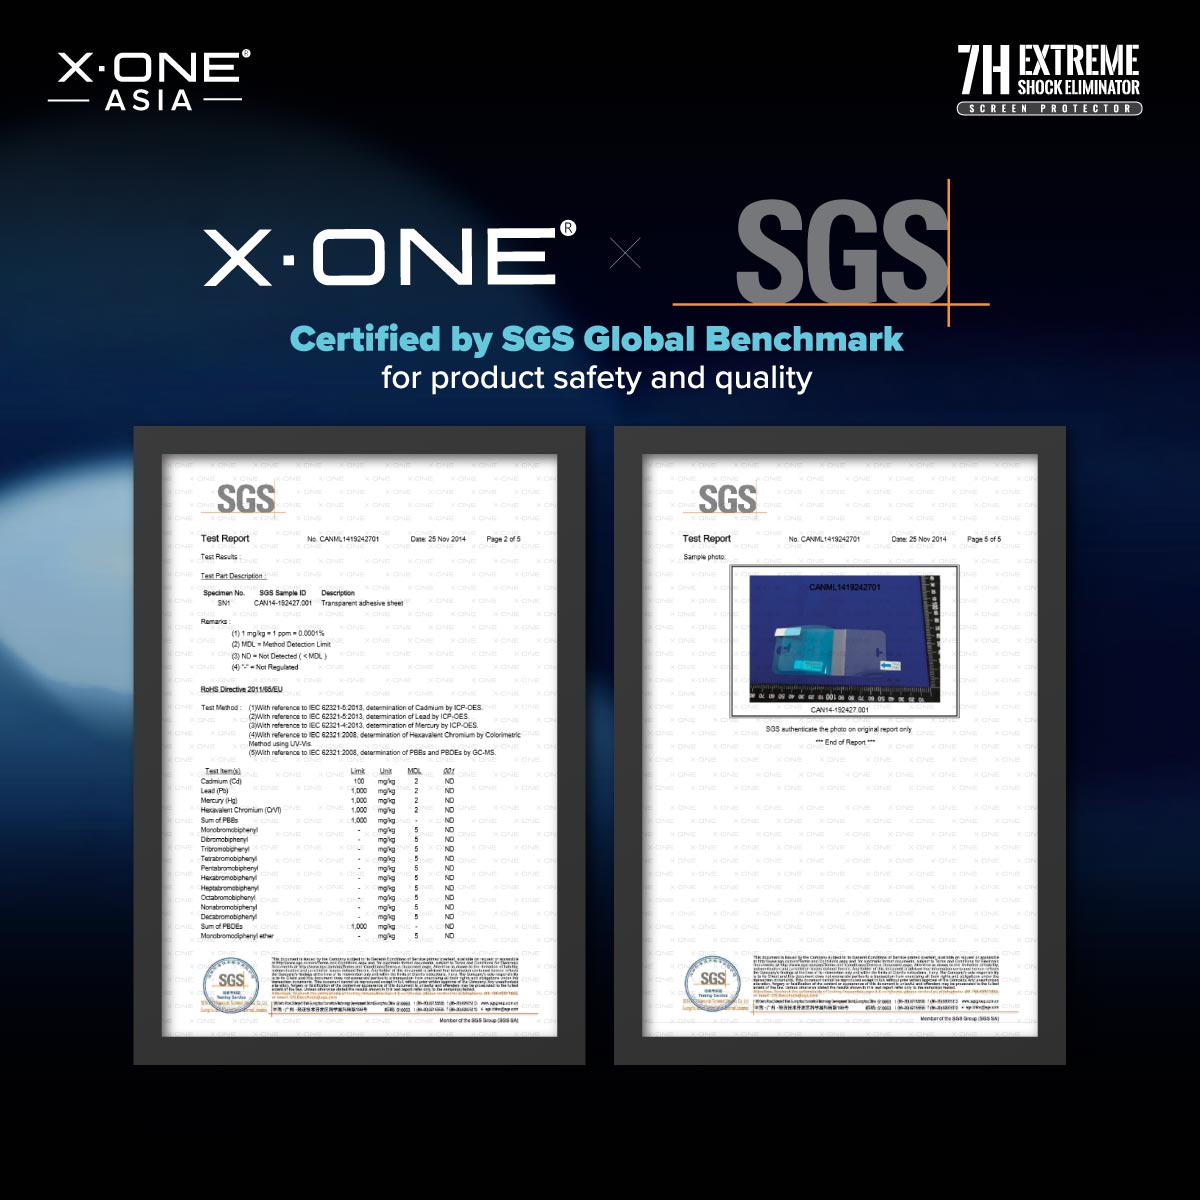 Certified by SGS Global Benchmark 2